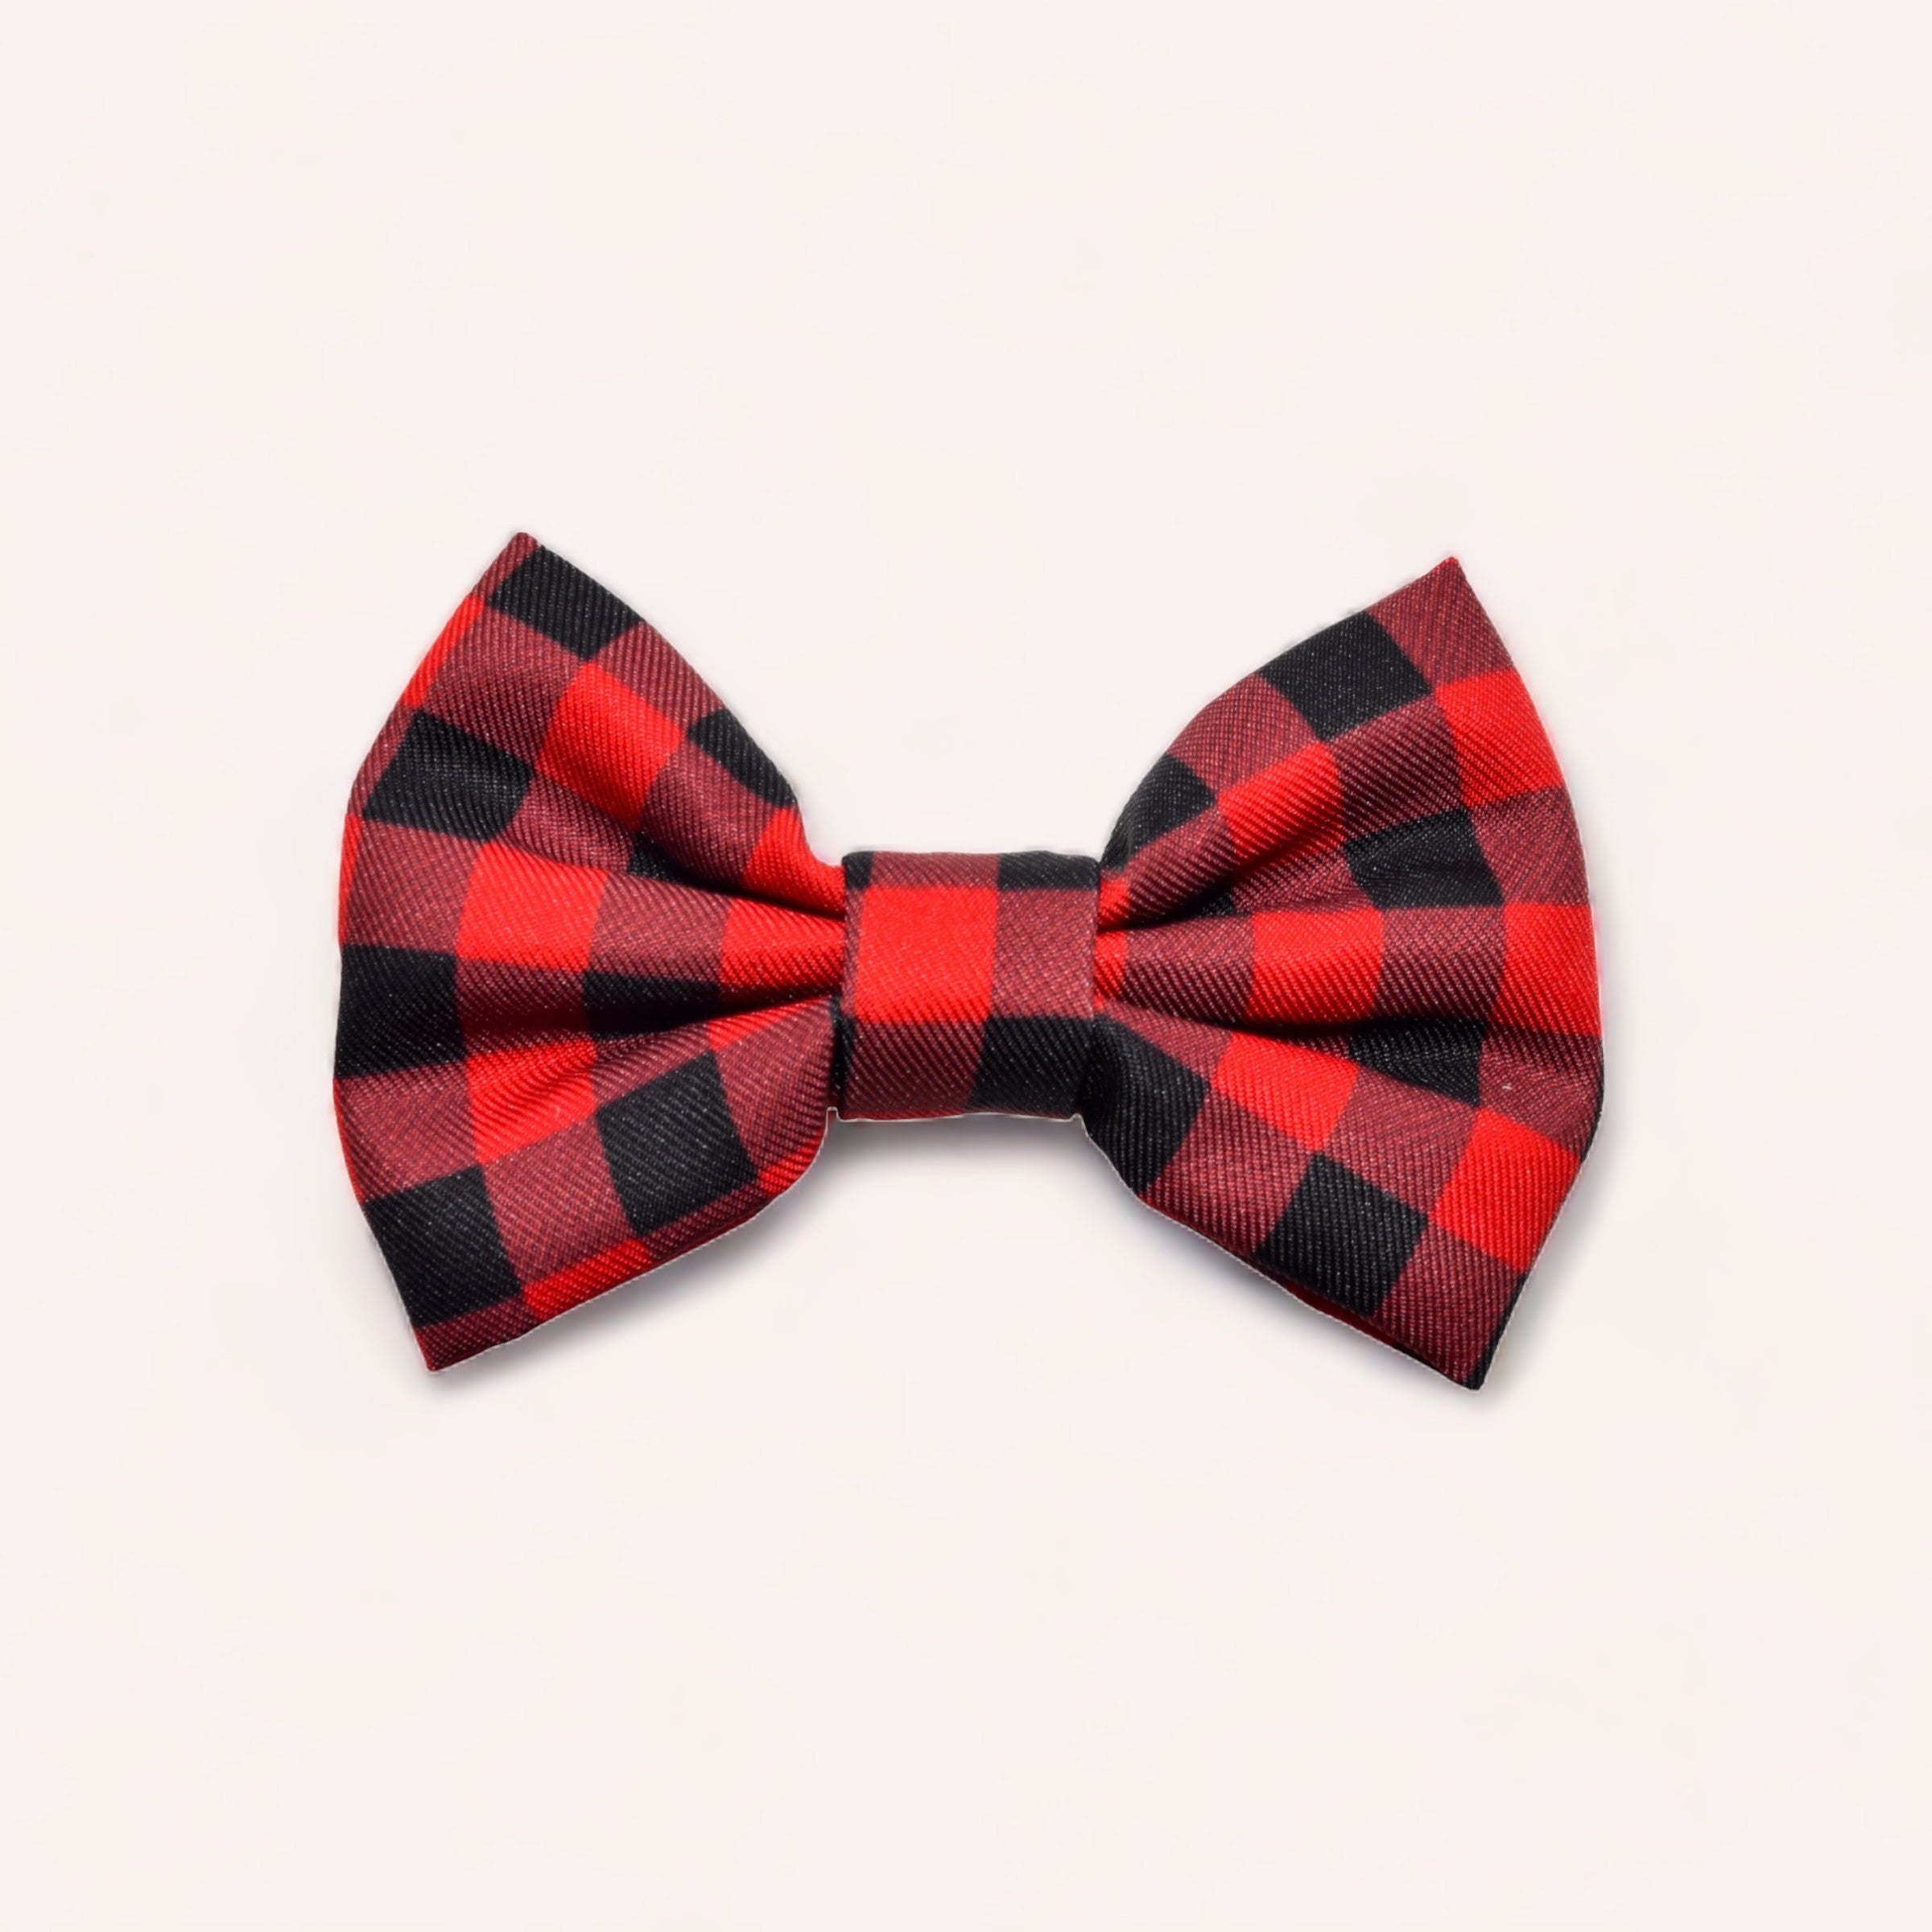 A classic red and black checkered Buffalo Bow by Wolves of Wellington for dapper dogs, isolated on a white background.